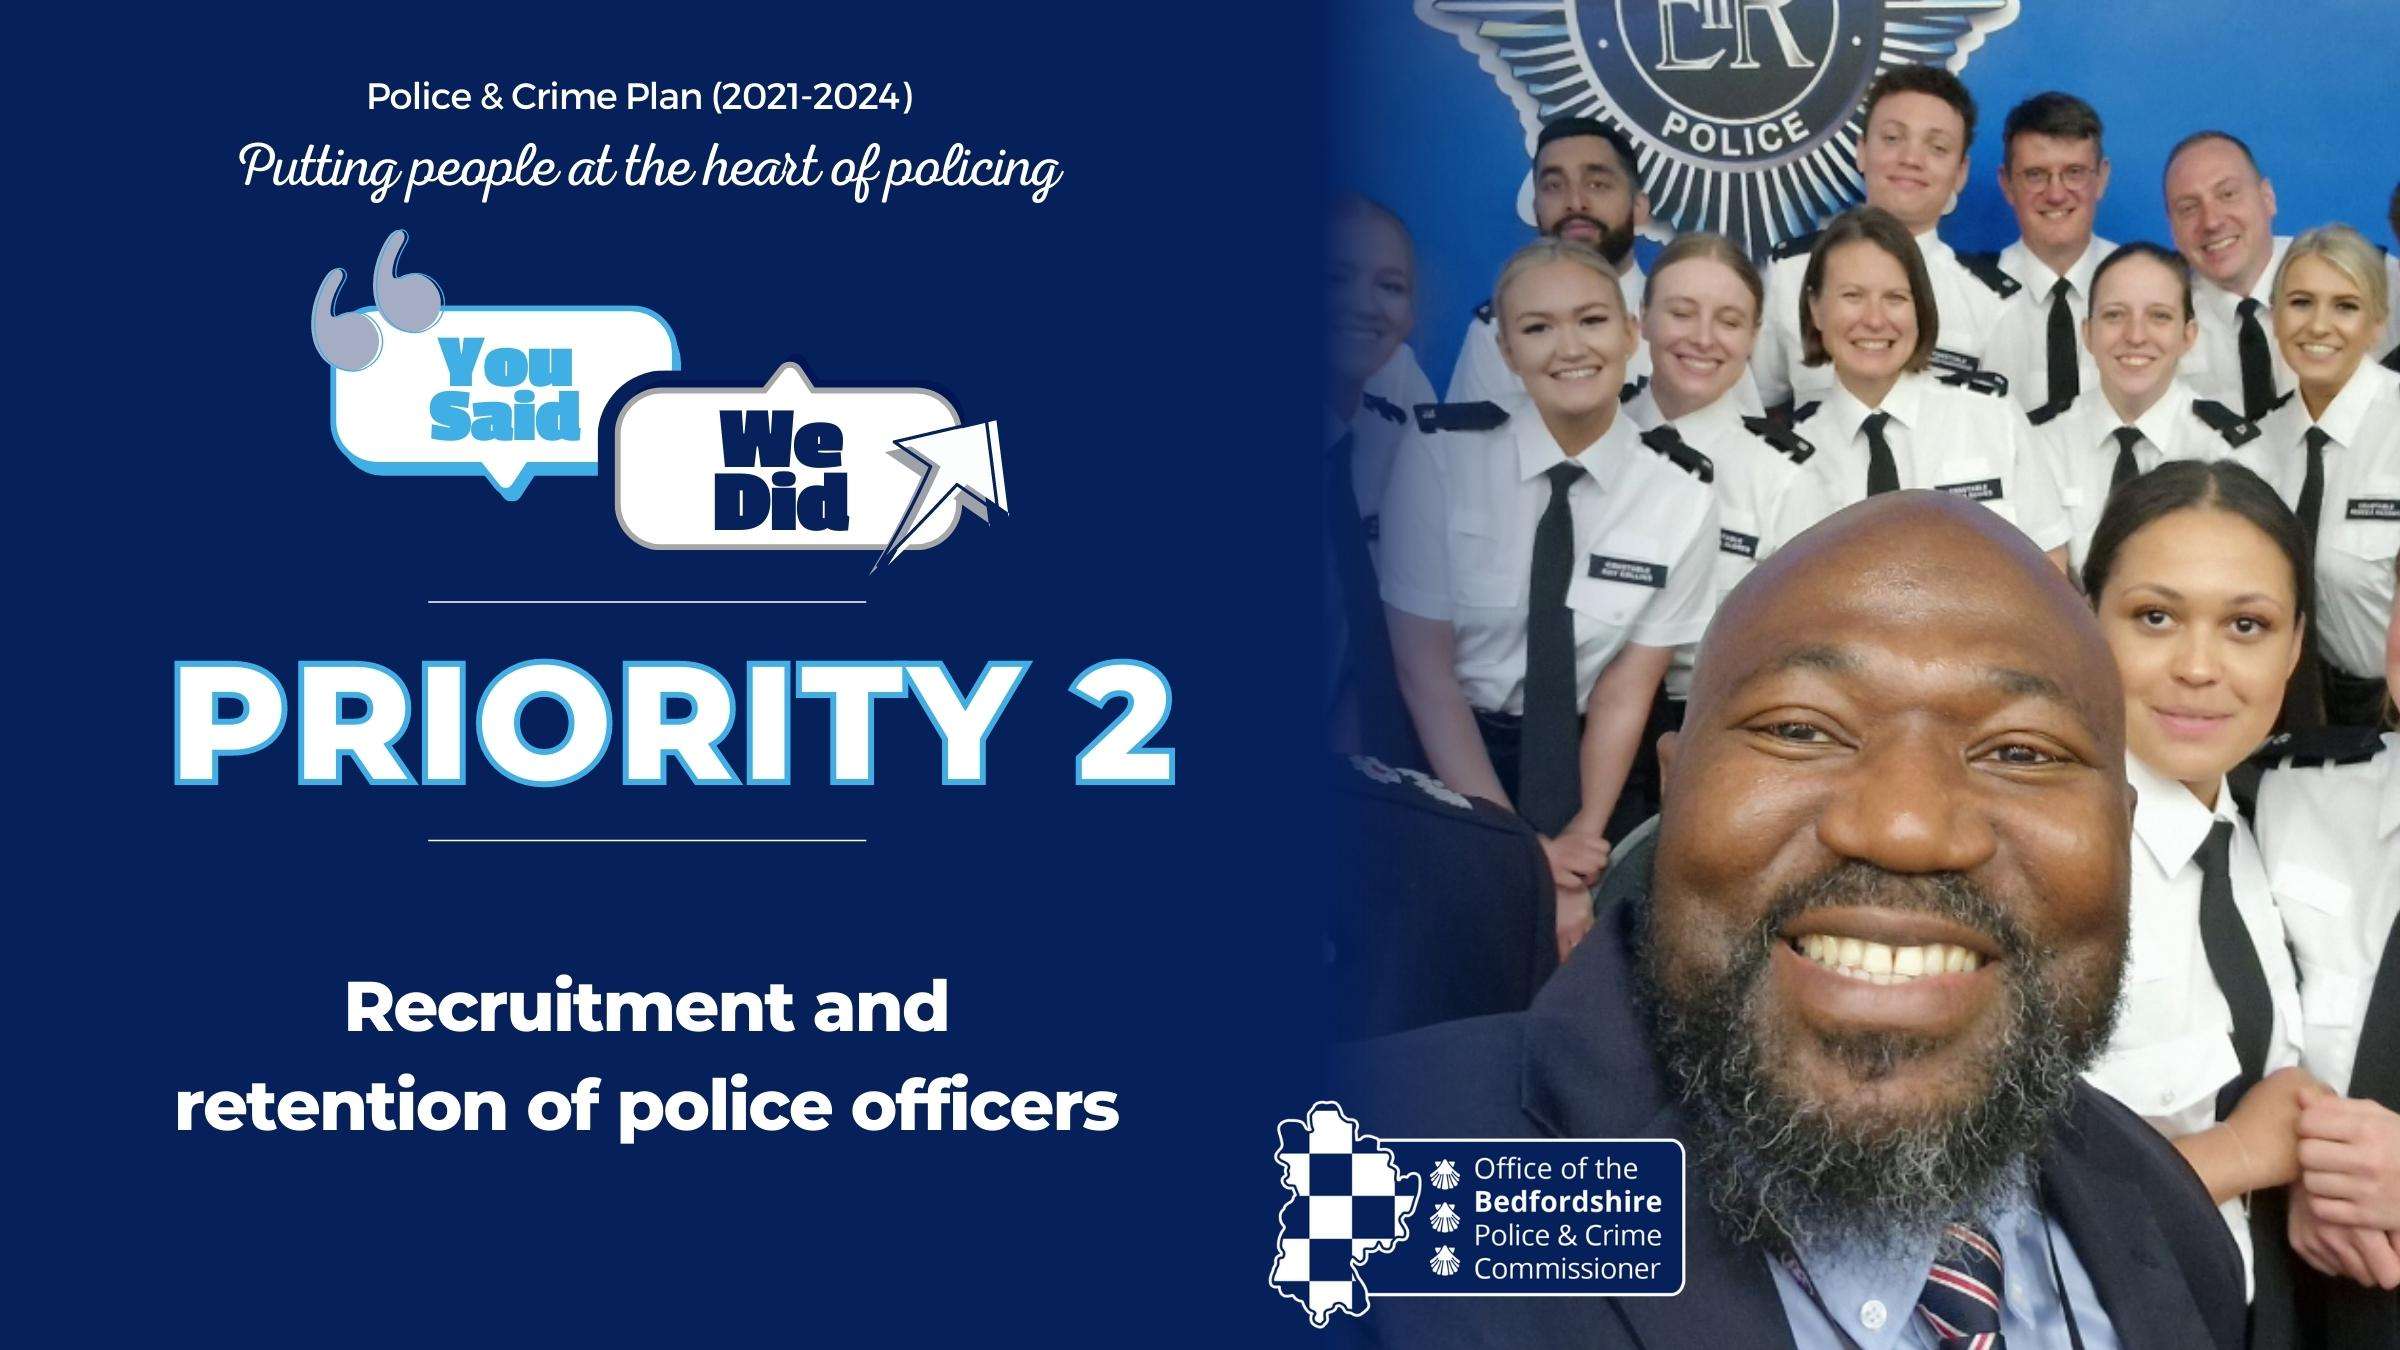 Priority 2, Recruitment and retention of police officers.